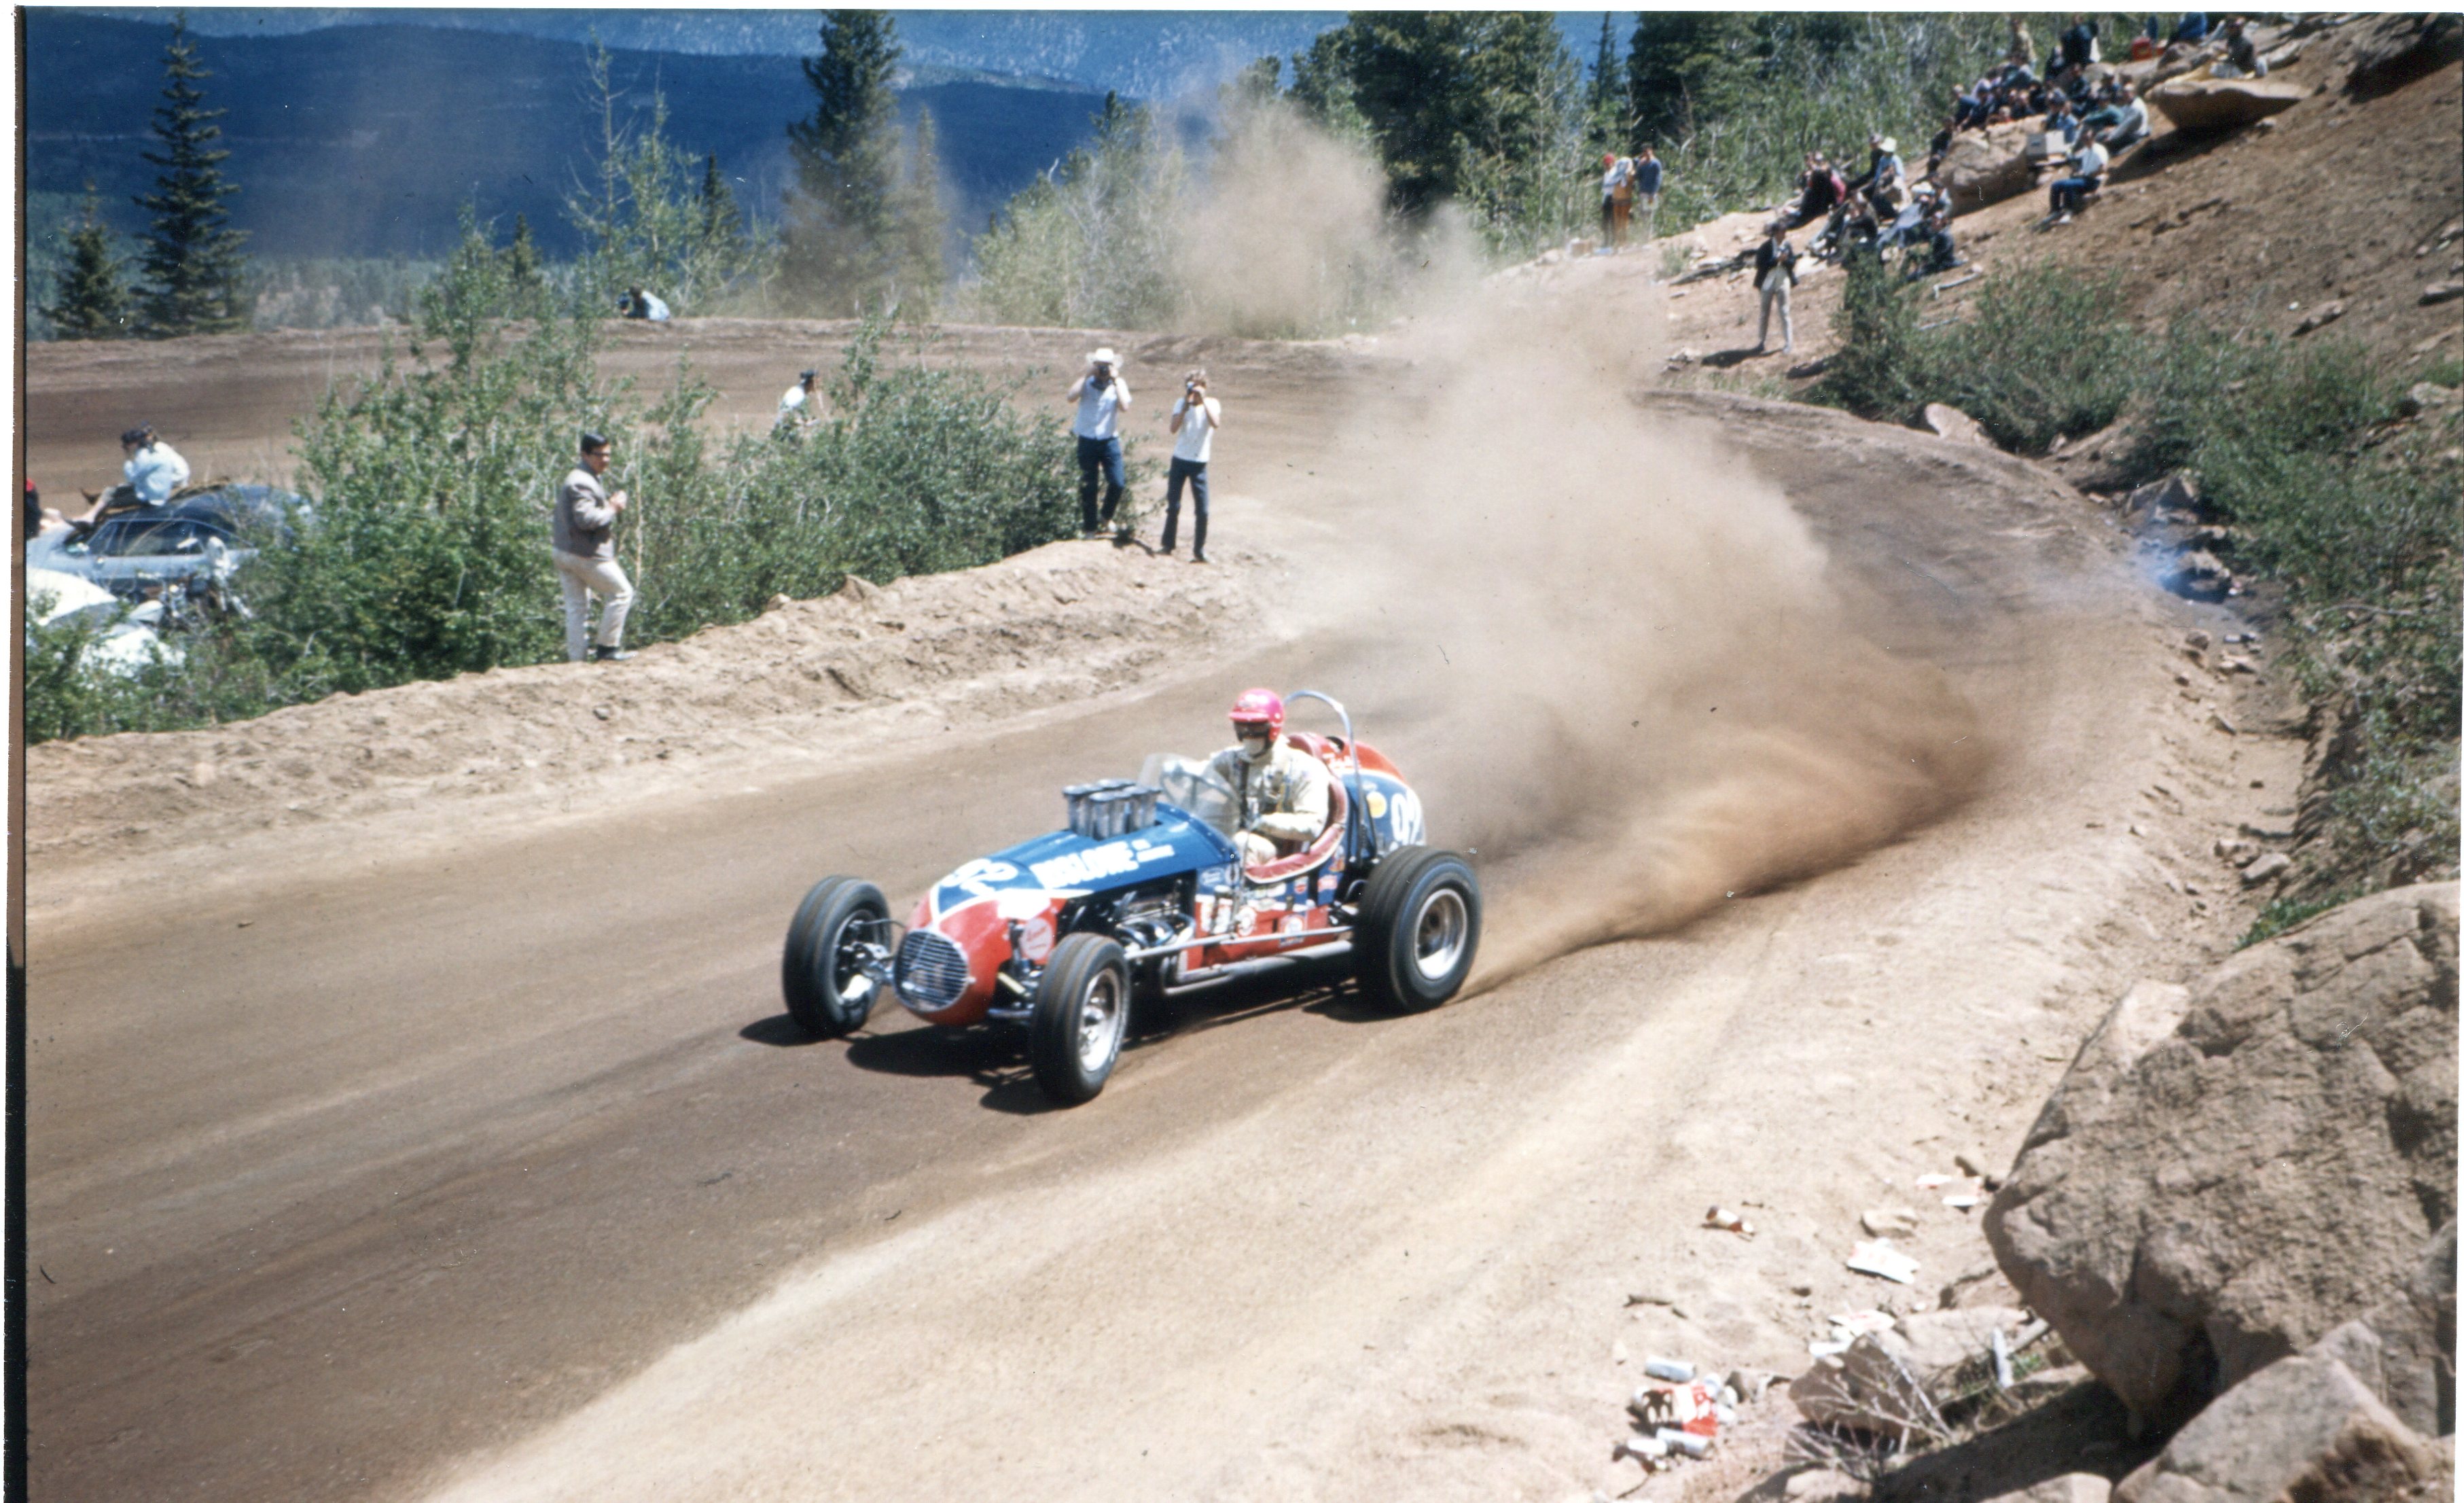 Photo of an open-wheeled race car, speeding past a hairpin turn on a dirt race track, a modest cloud of dirt kicked up behind the car. Spectators stand on both sides of the track and up the rocky hillside. The car itself is painted in red, white, and blue, although the markings are difficult to read. The driver has a white suit and a red helmet.